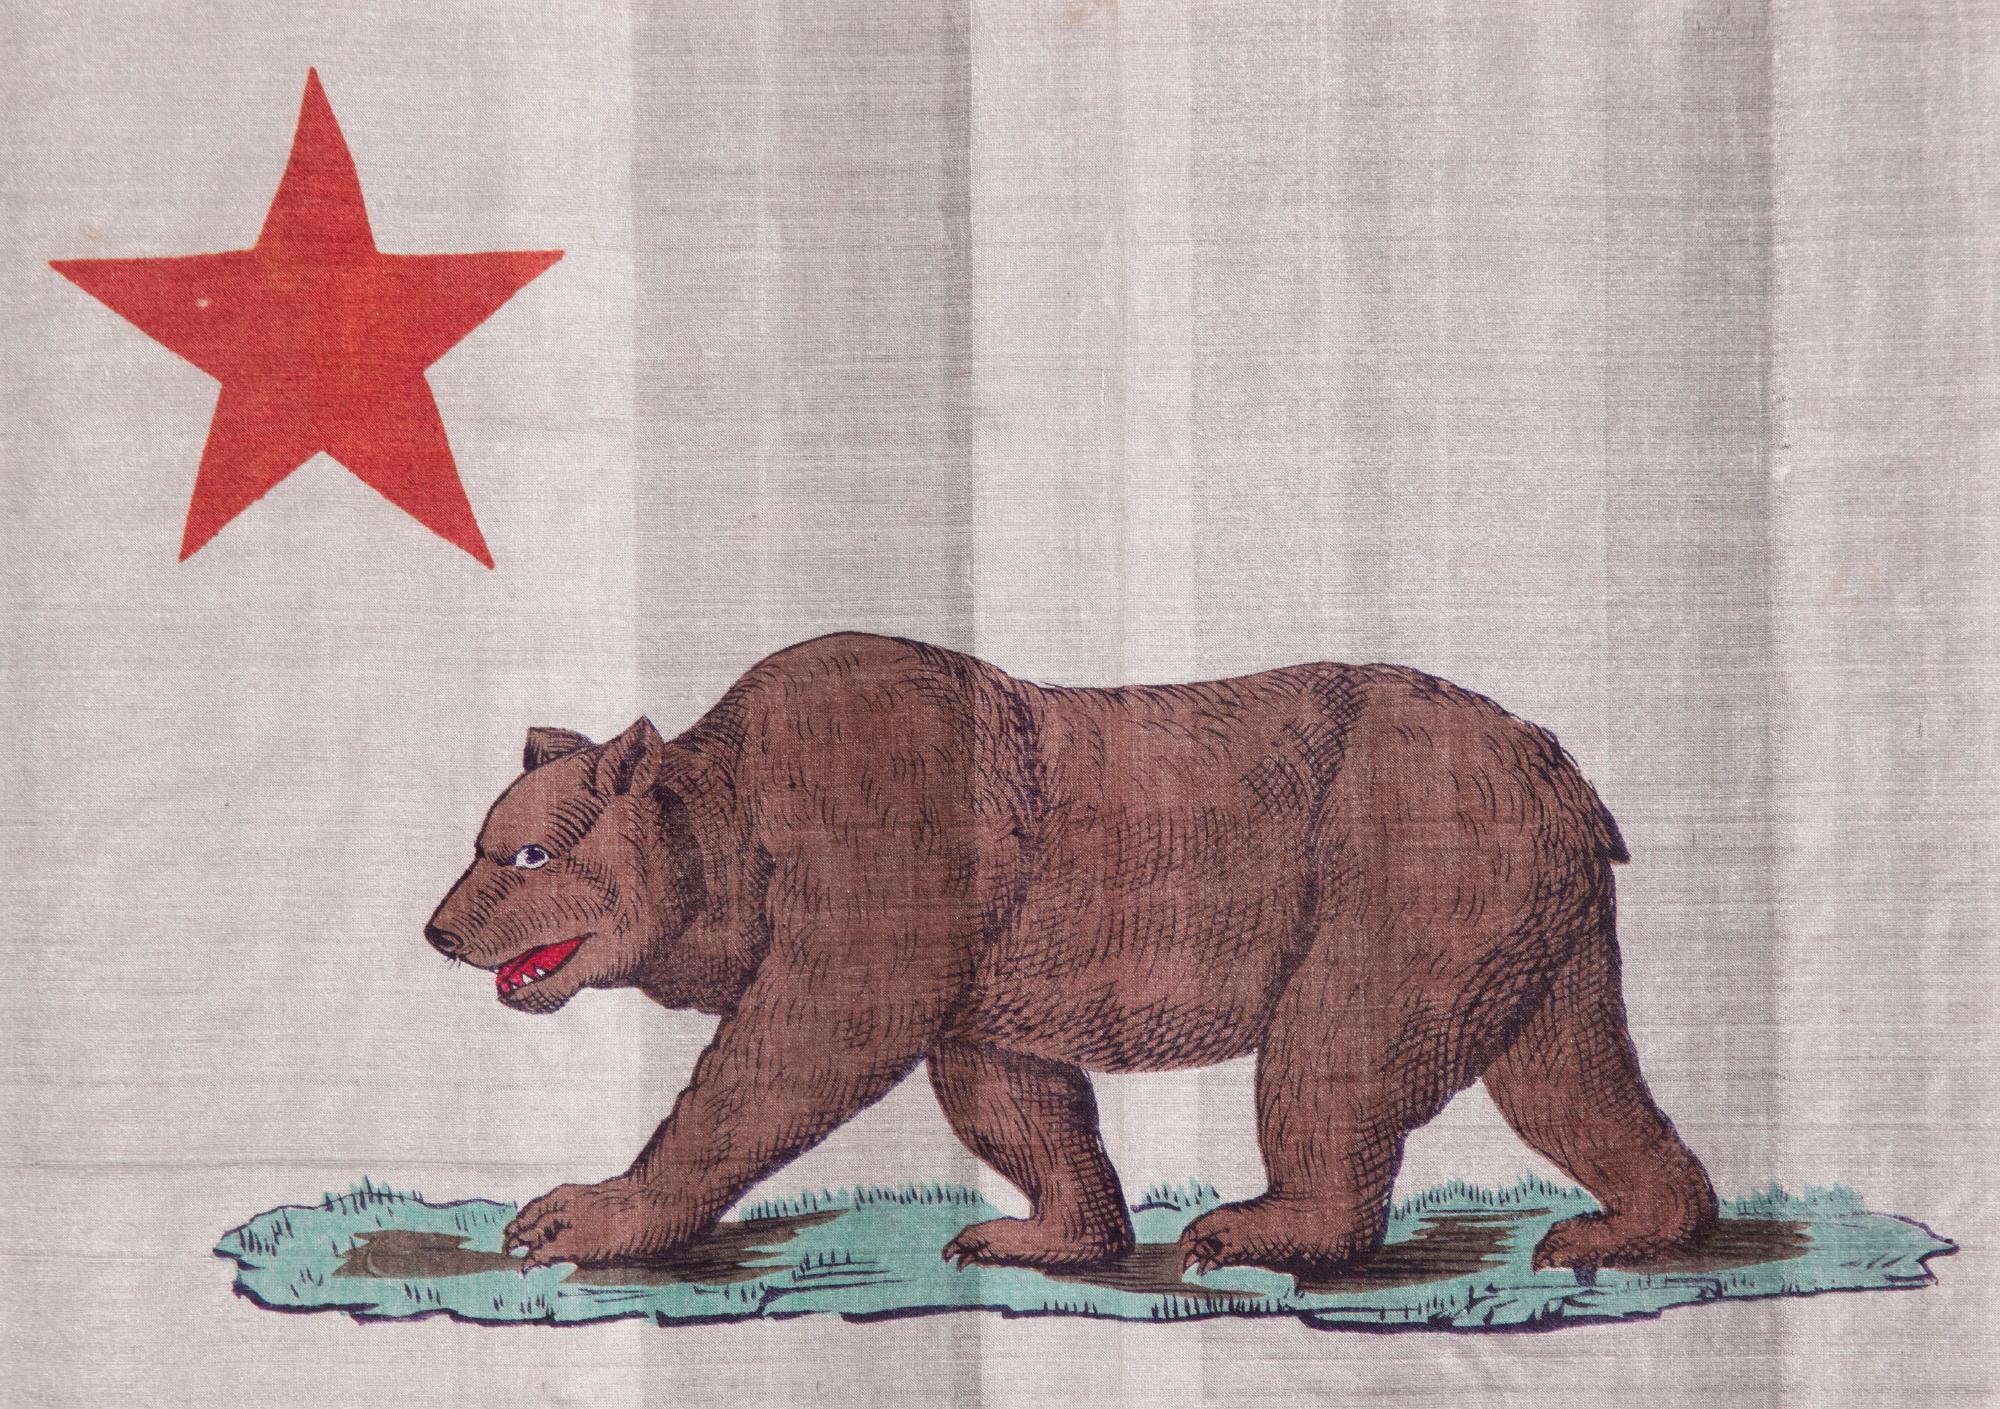 EARLY KERCHIEF IN THE FORM OF THE CALIFORNIA STATE BEAR FLAG, PROBABLY MADE FOR THE PANAMA-PACIFIC INTERNATIONAL EXPOSITION IN SAN FRANCISCO IN 1915

Printed on silk, this beautiful kerchief is styled in the format of the California State flag.